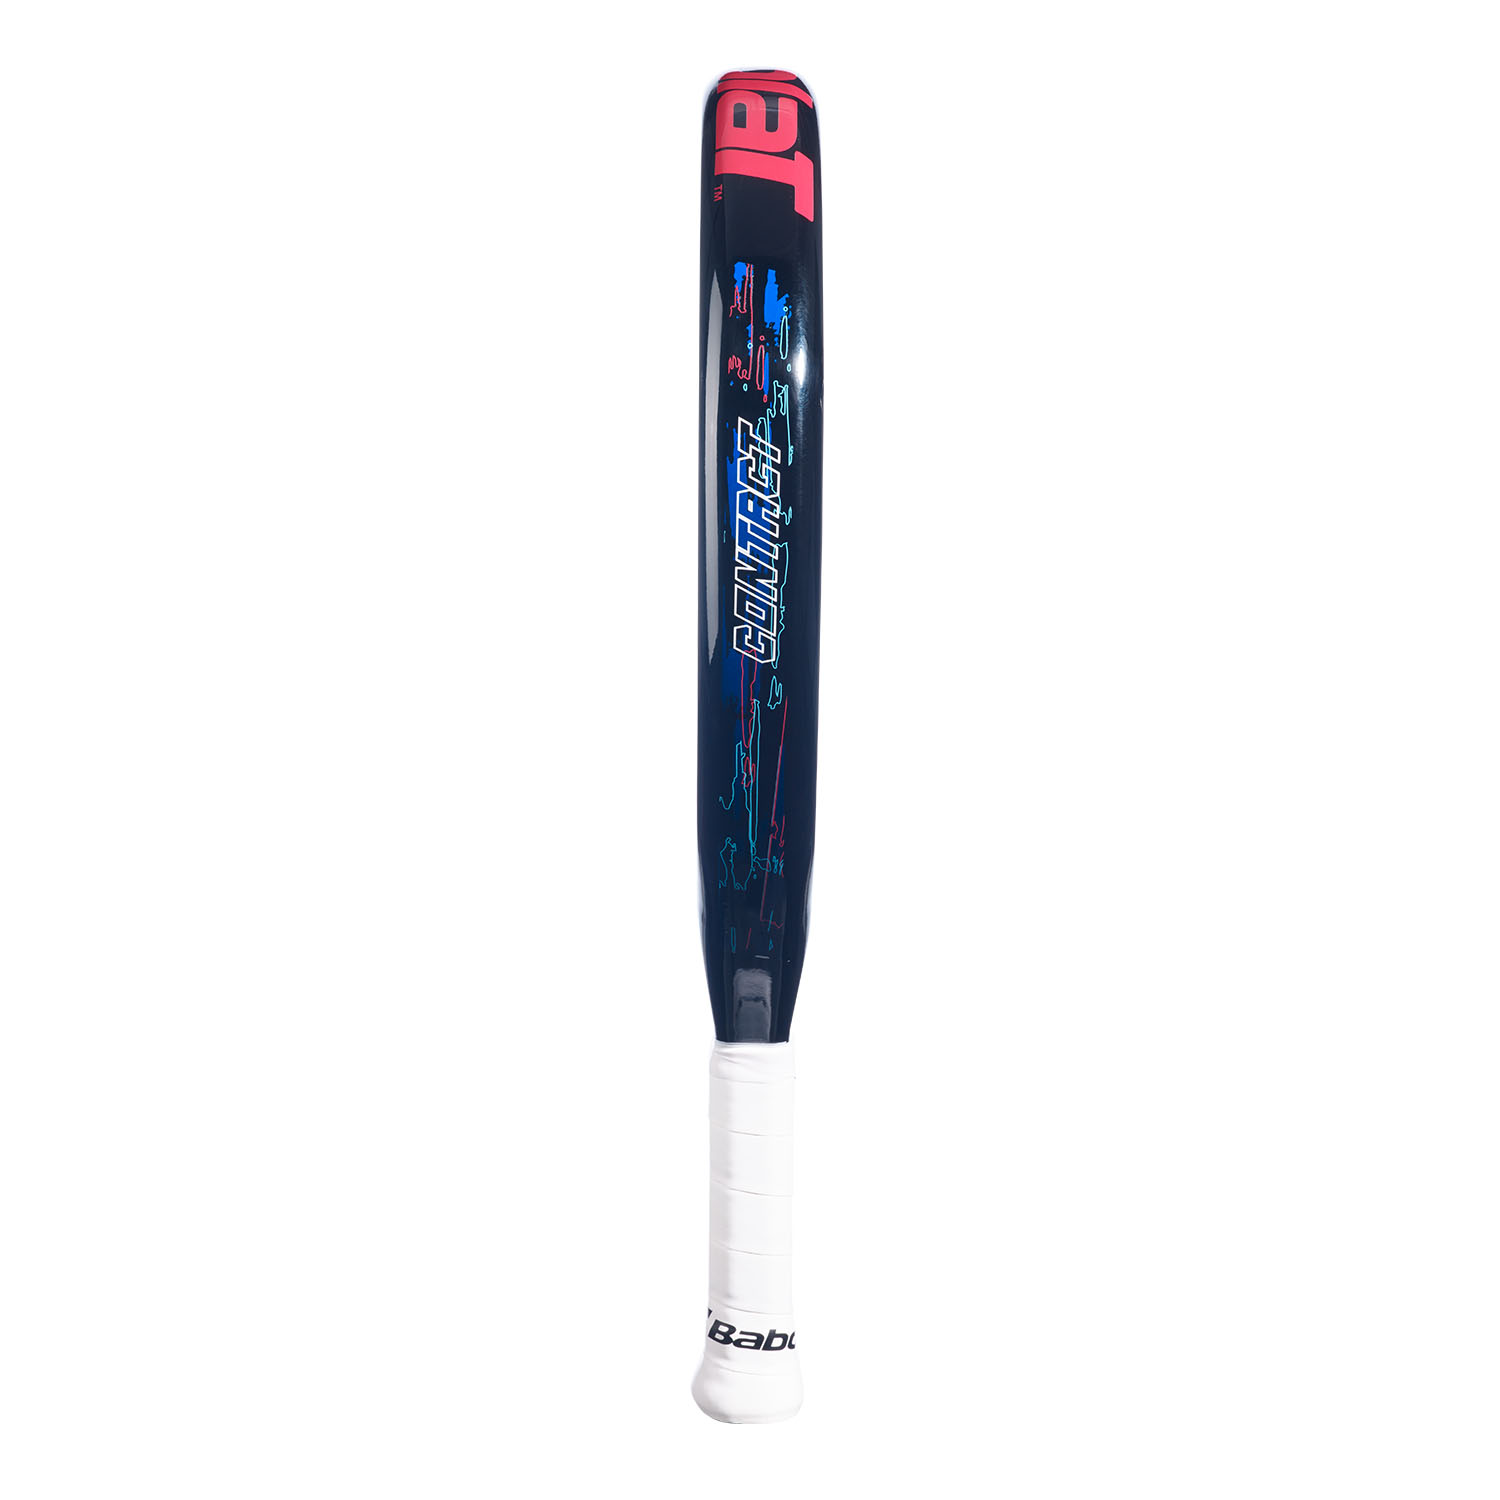 Babolat Contact Padel - Black/Blue/Red